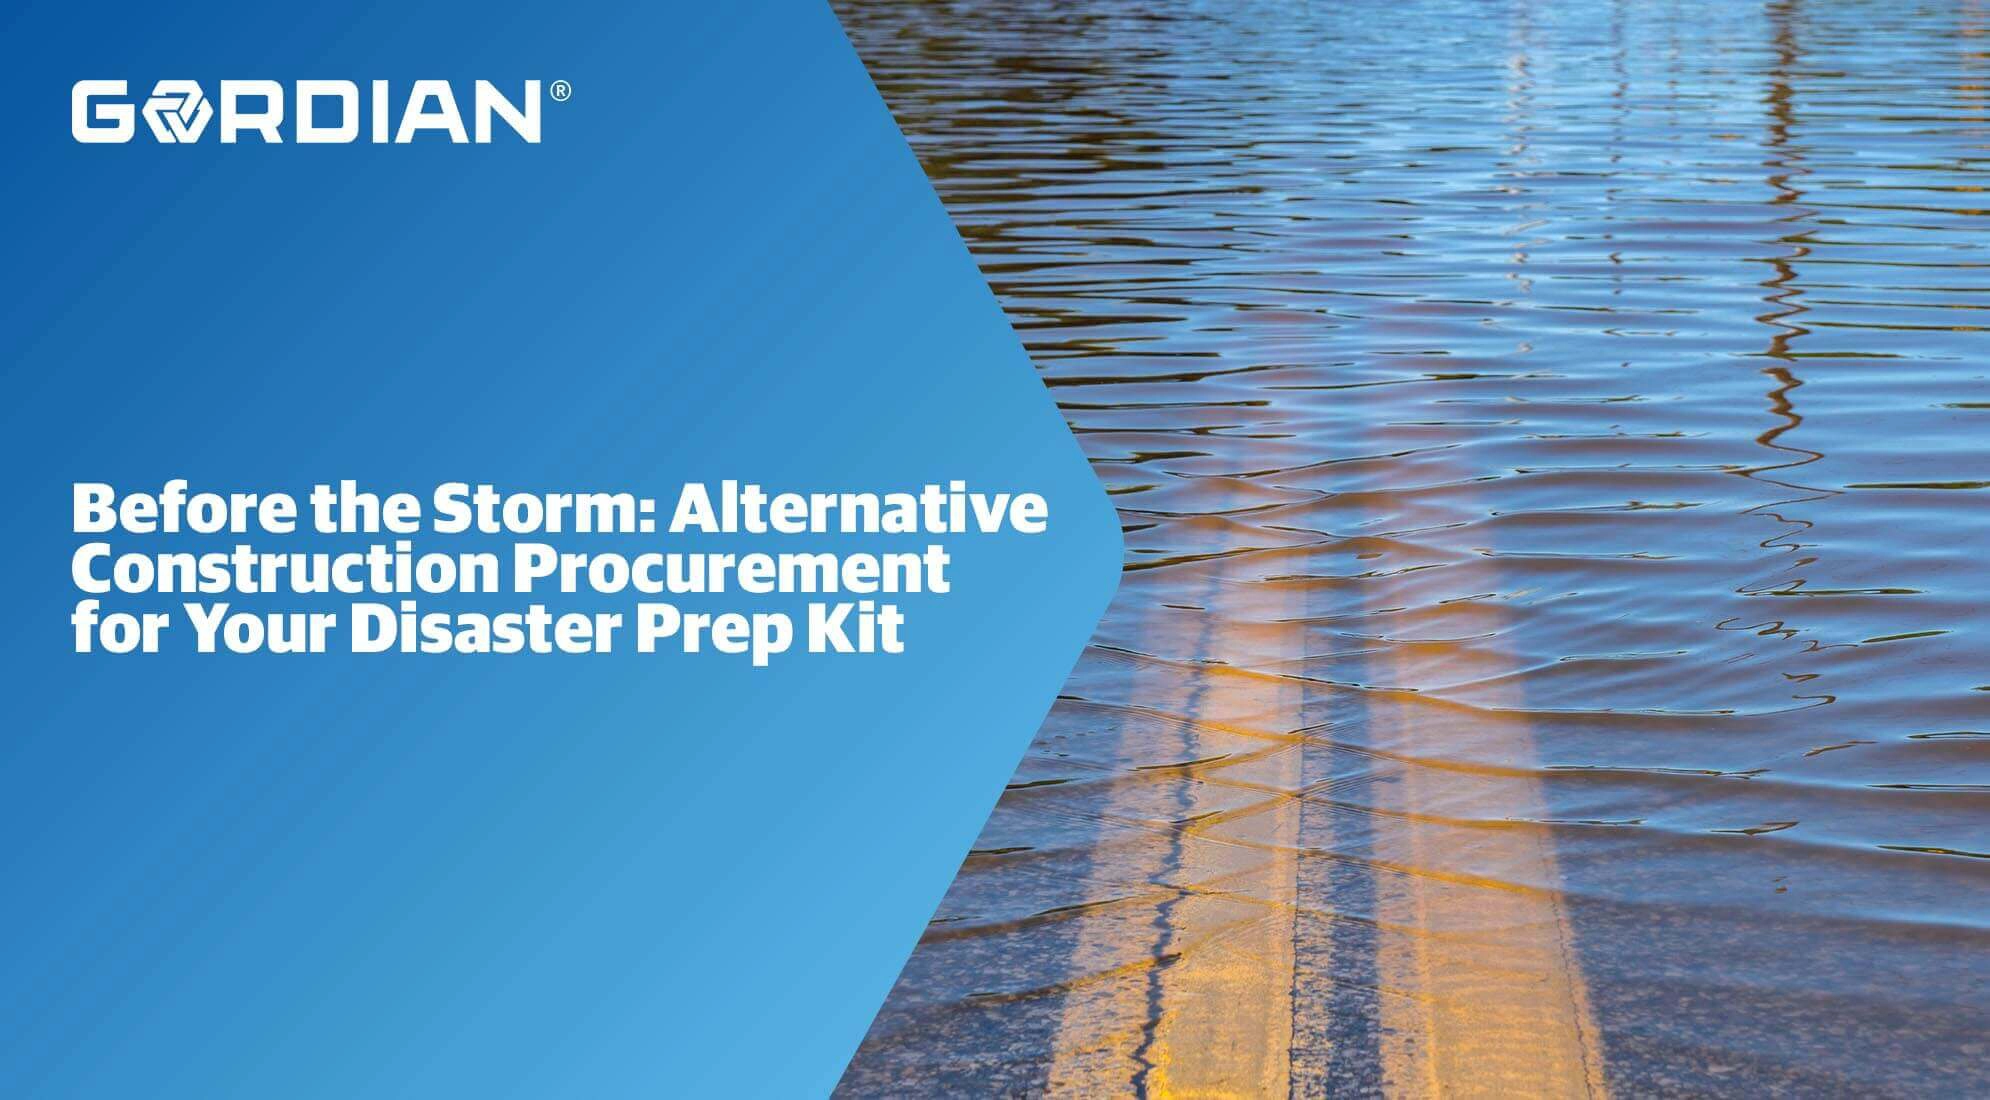 Before the Storm: Alternative Construction Procurement for Your Disaster Prep Kit 1